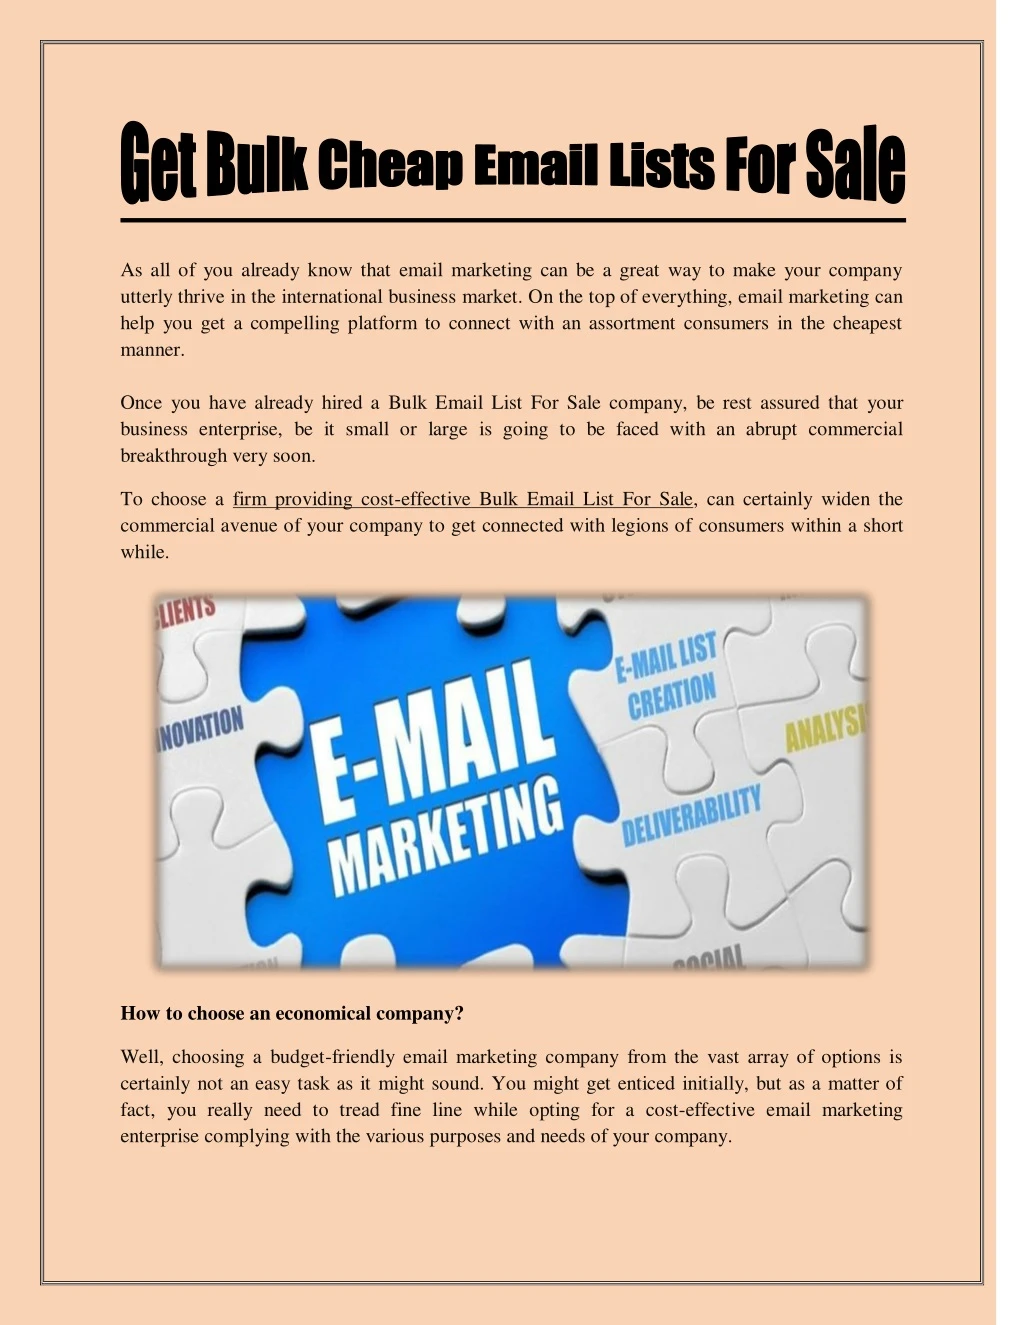 as all of you already know that email marketing